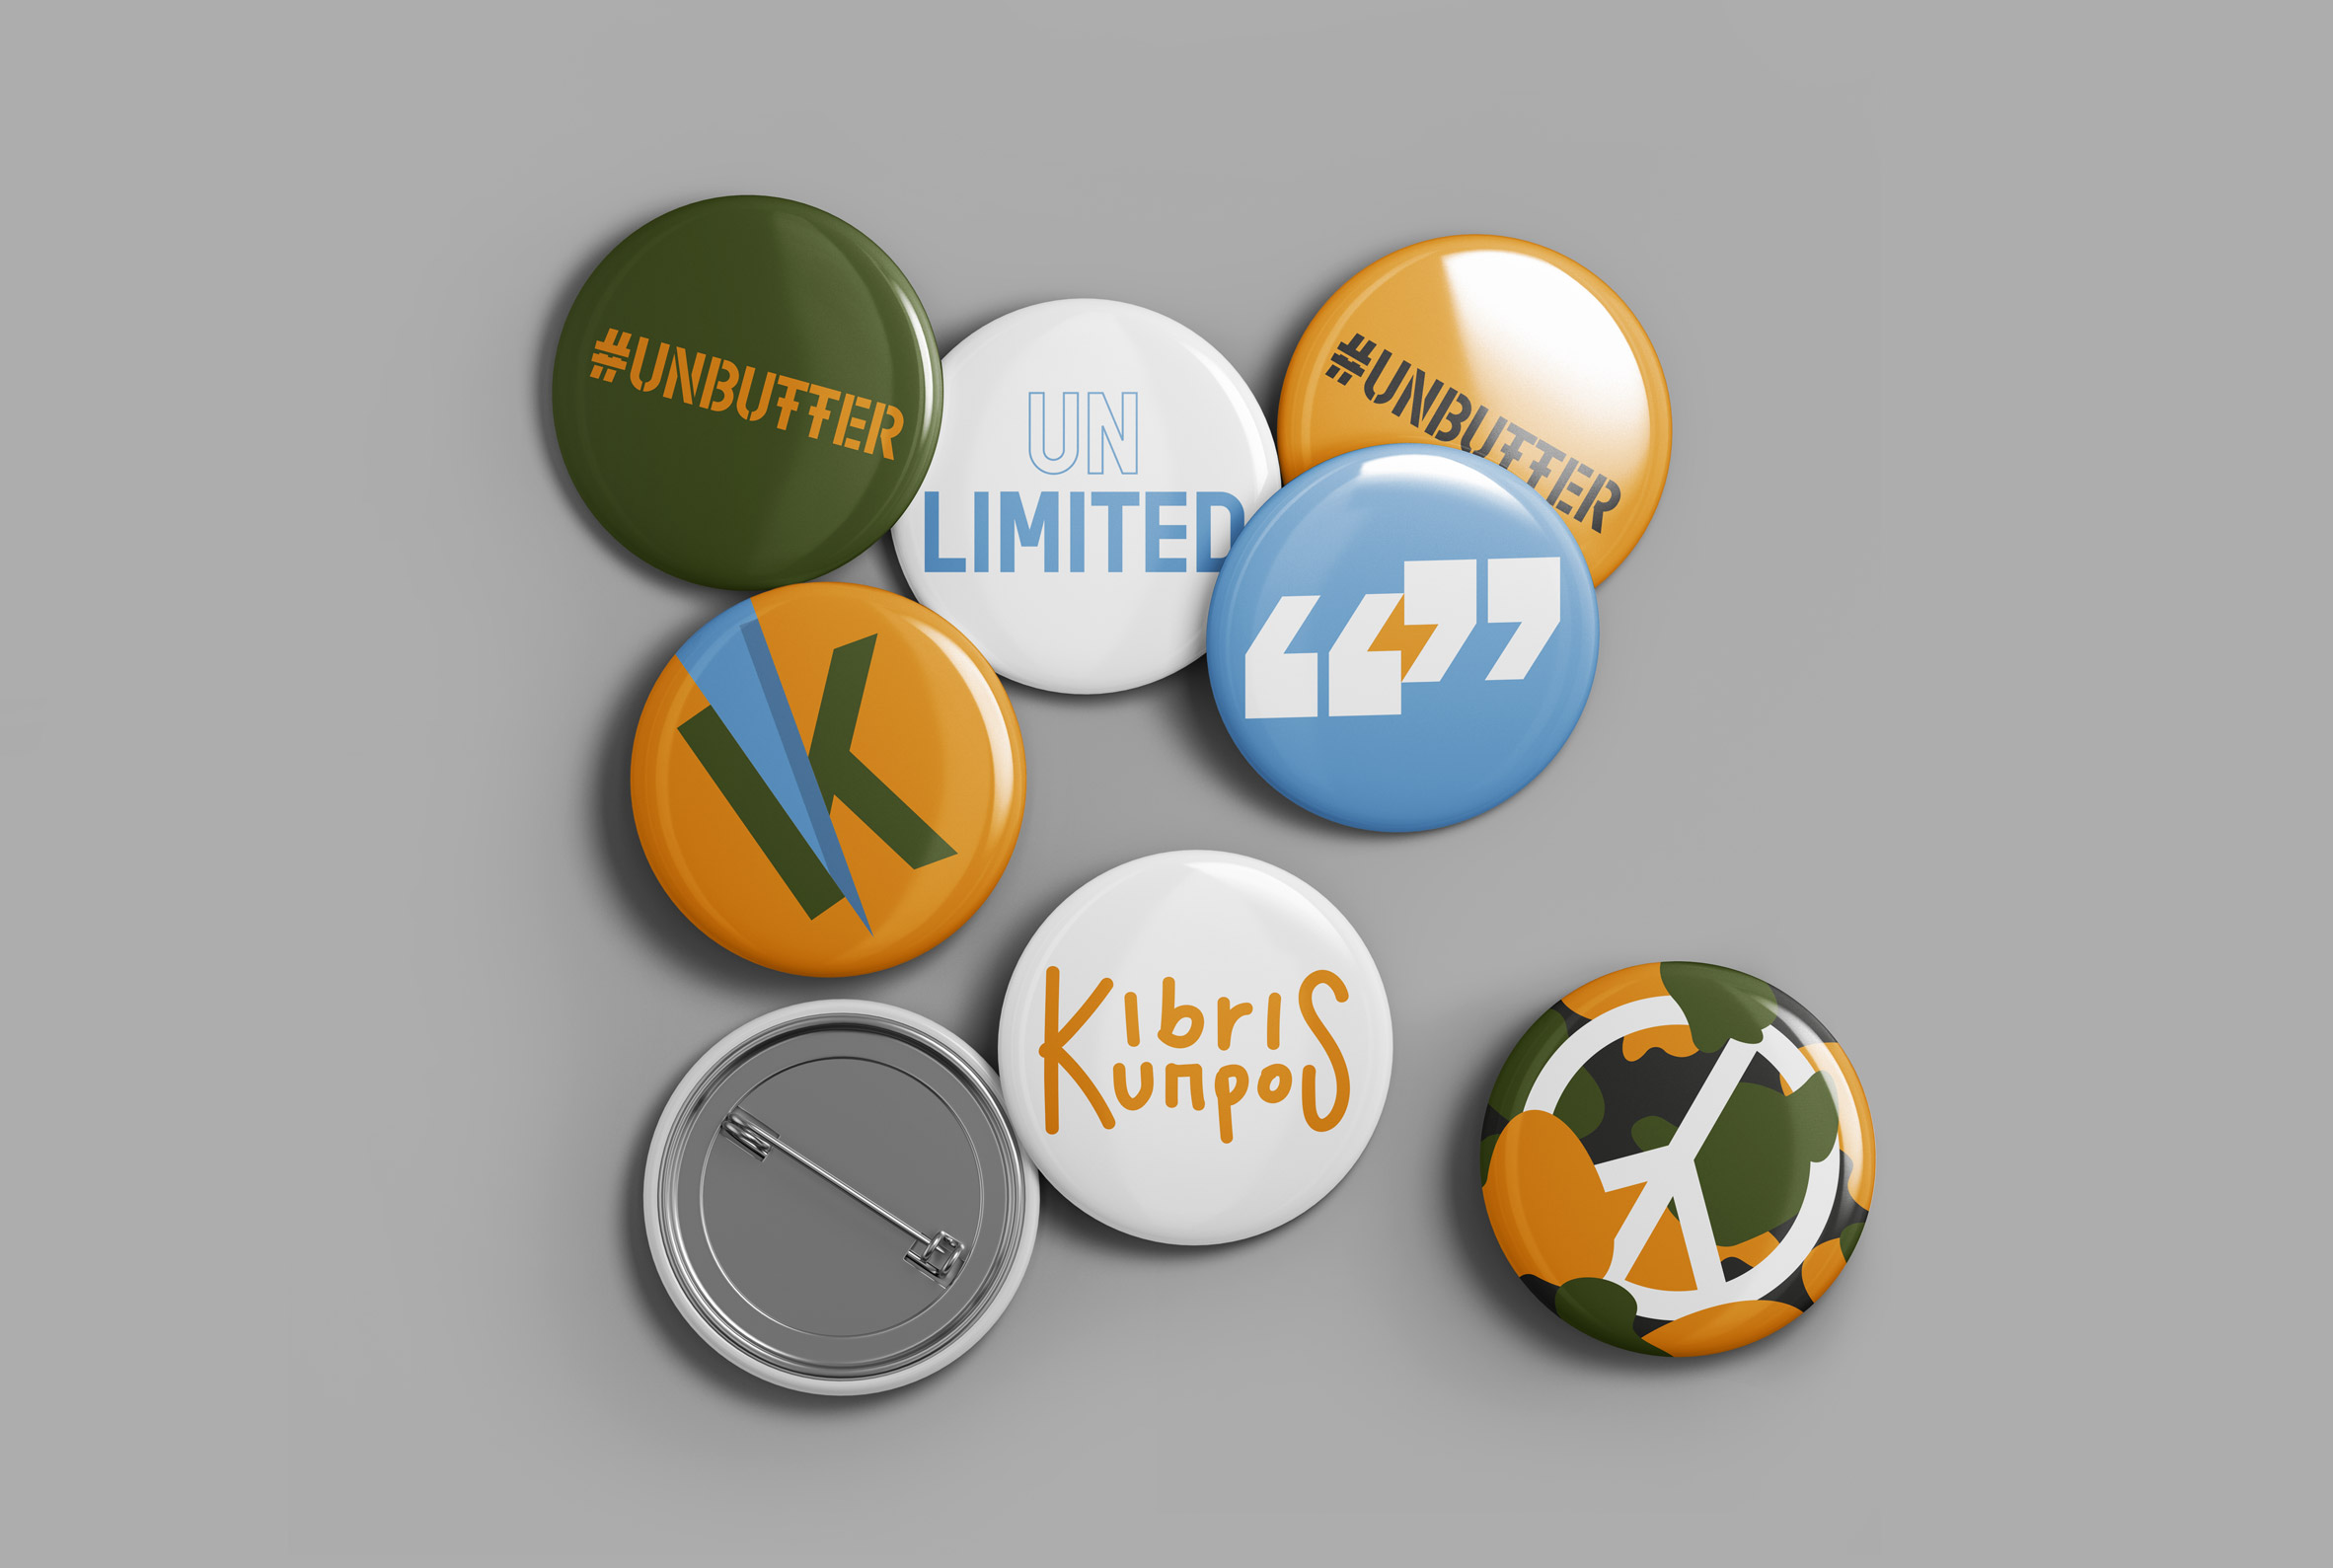 Pin badges from UNbuffer, a graphic design postcard project by Alexandros Kosmidis